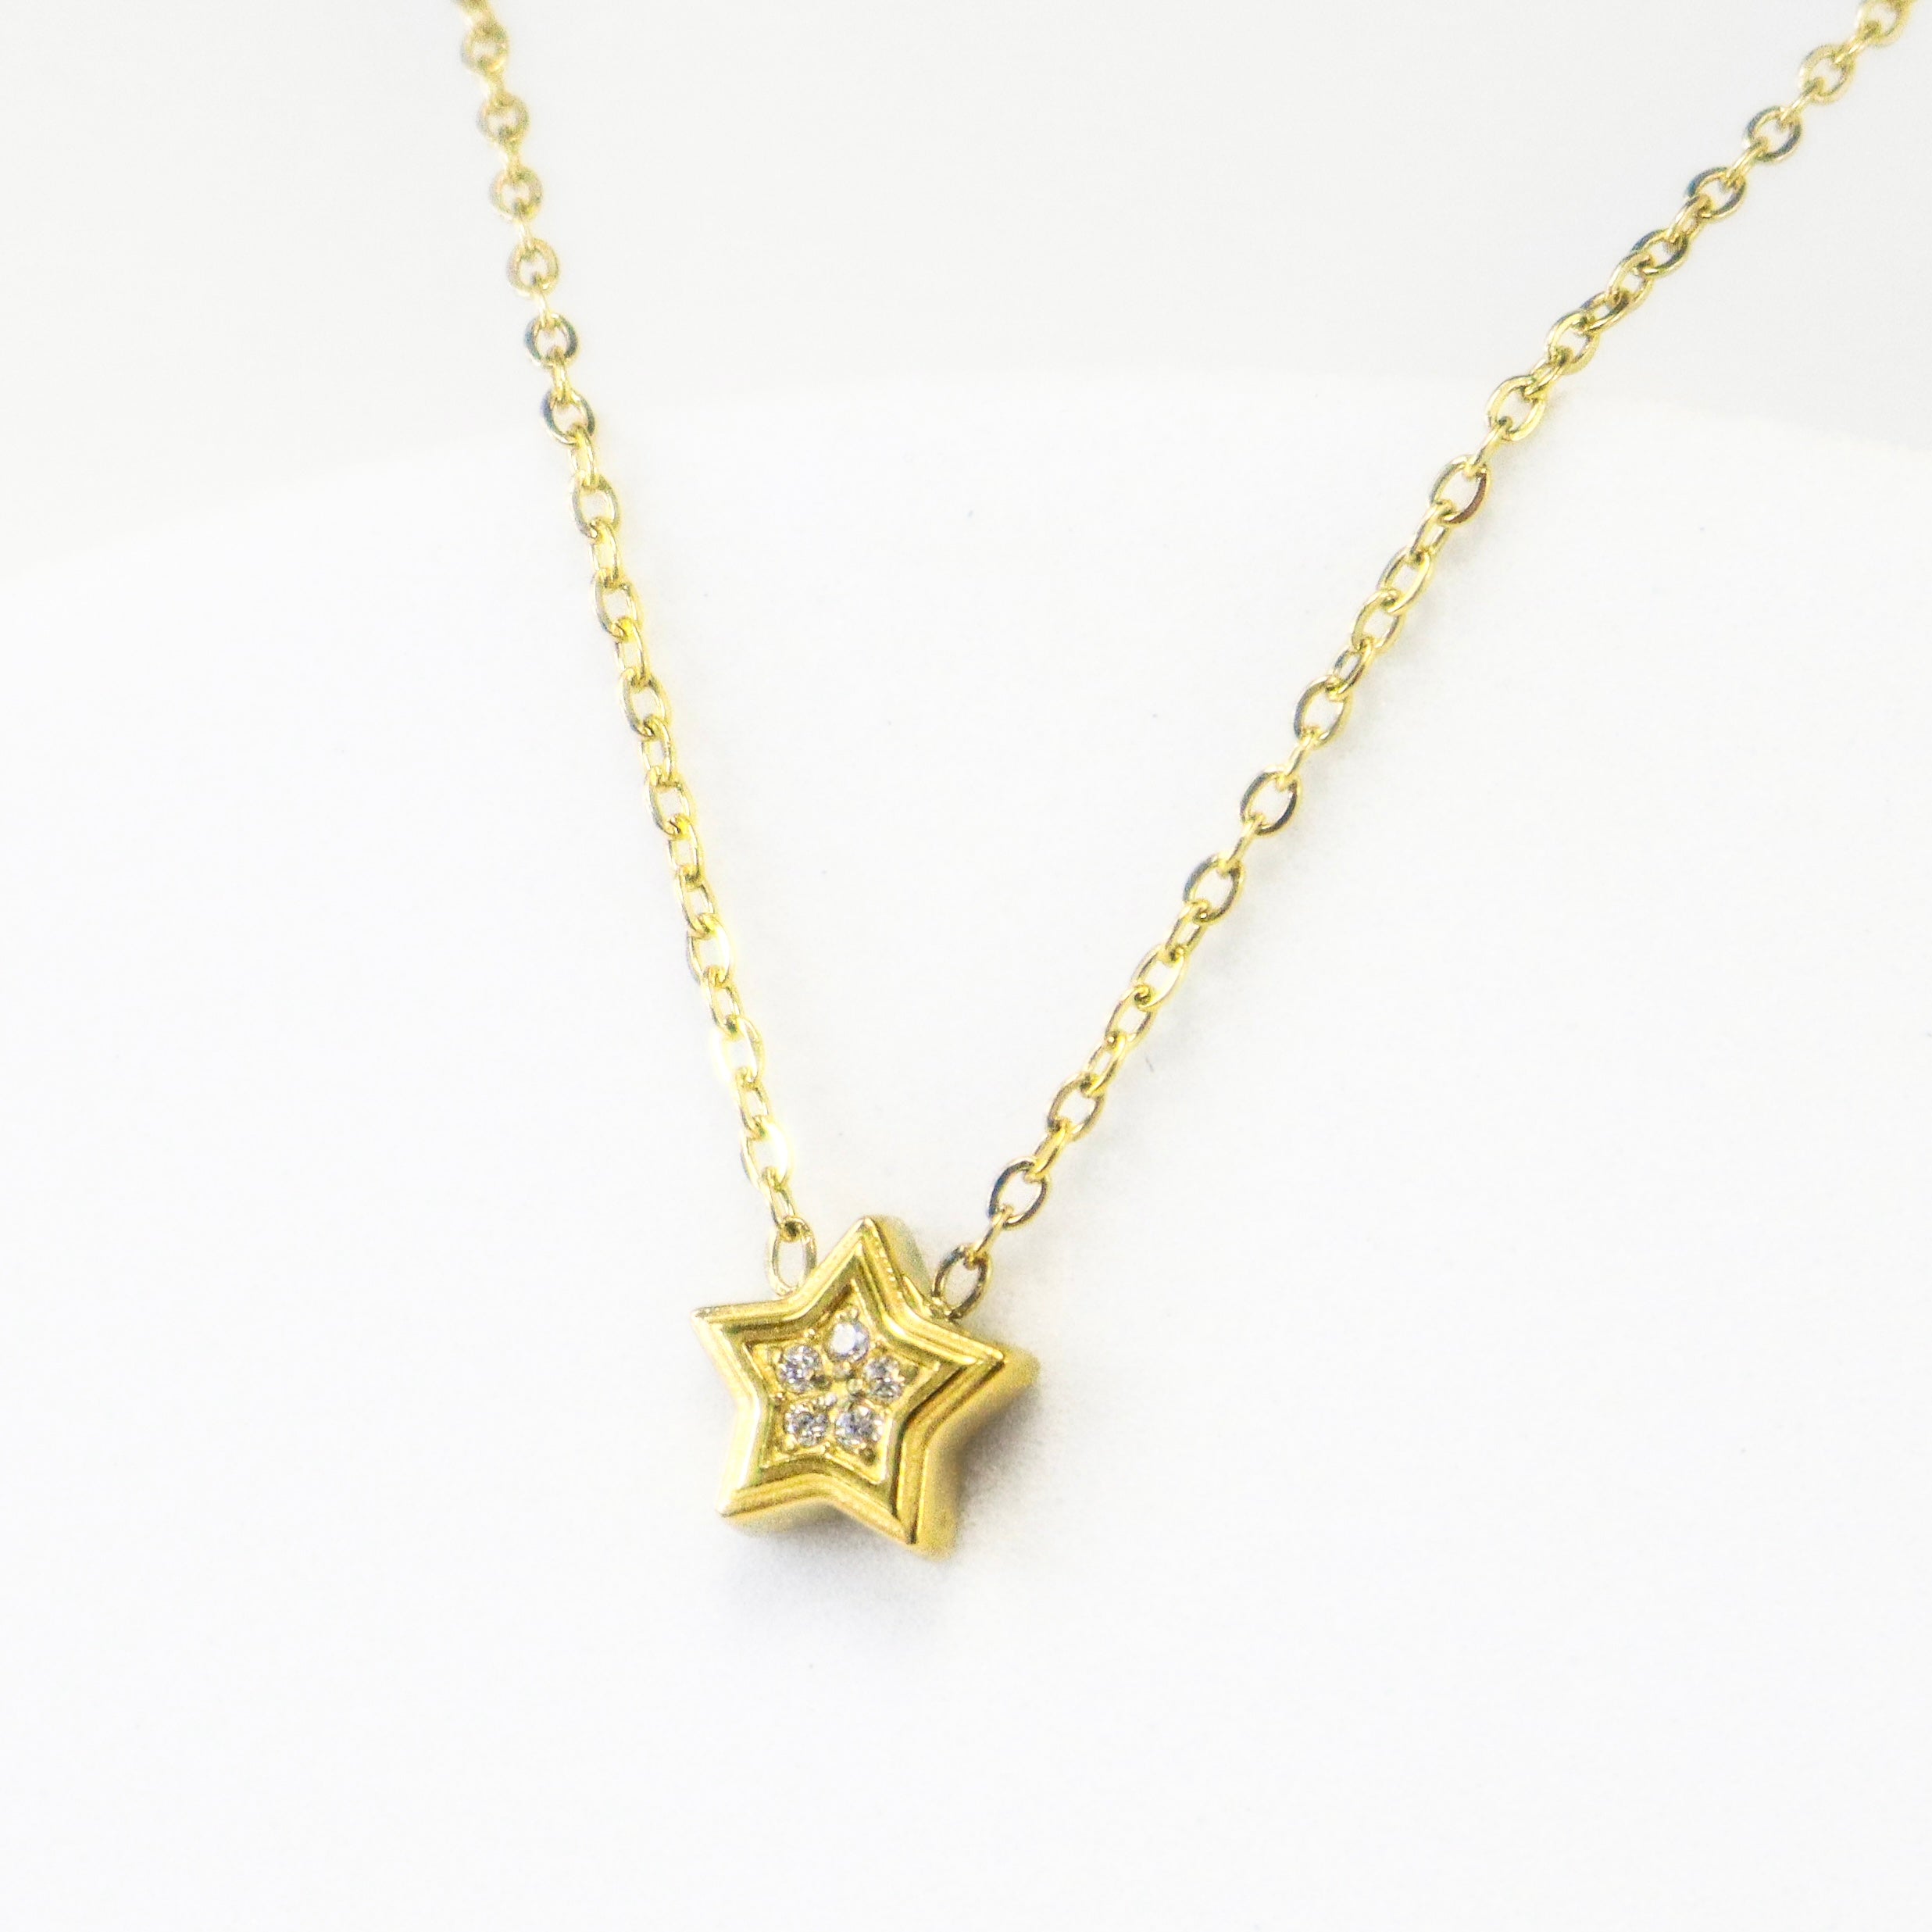 Reversible Dainty Gold Star Necklace